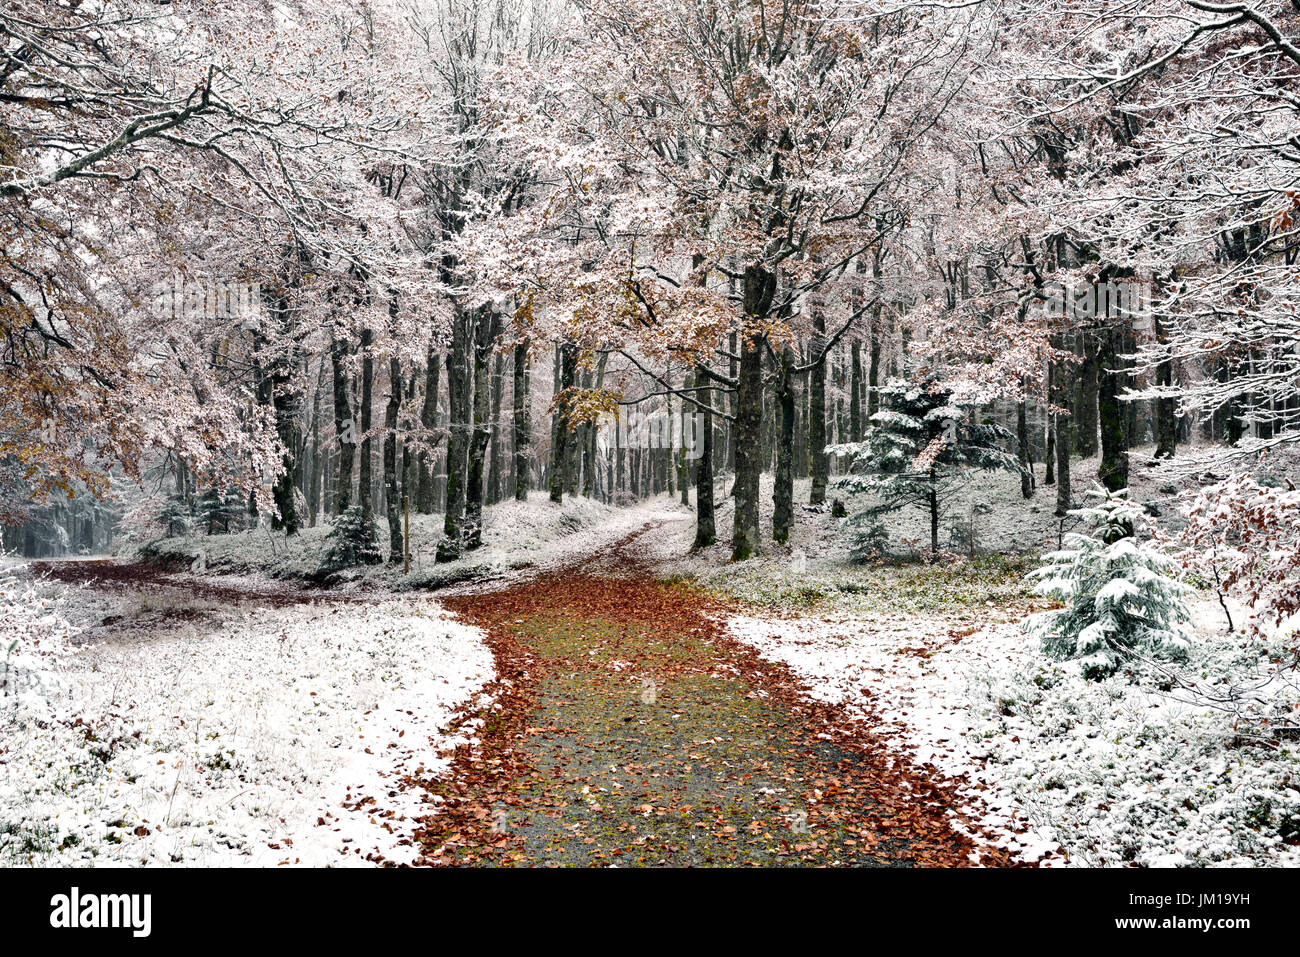 A winter view of a leafy footpath in a snow covered forest in Alsace, France Stock Photo